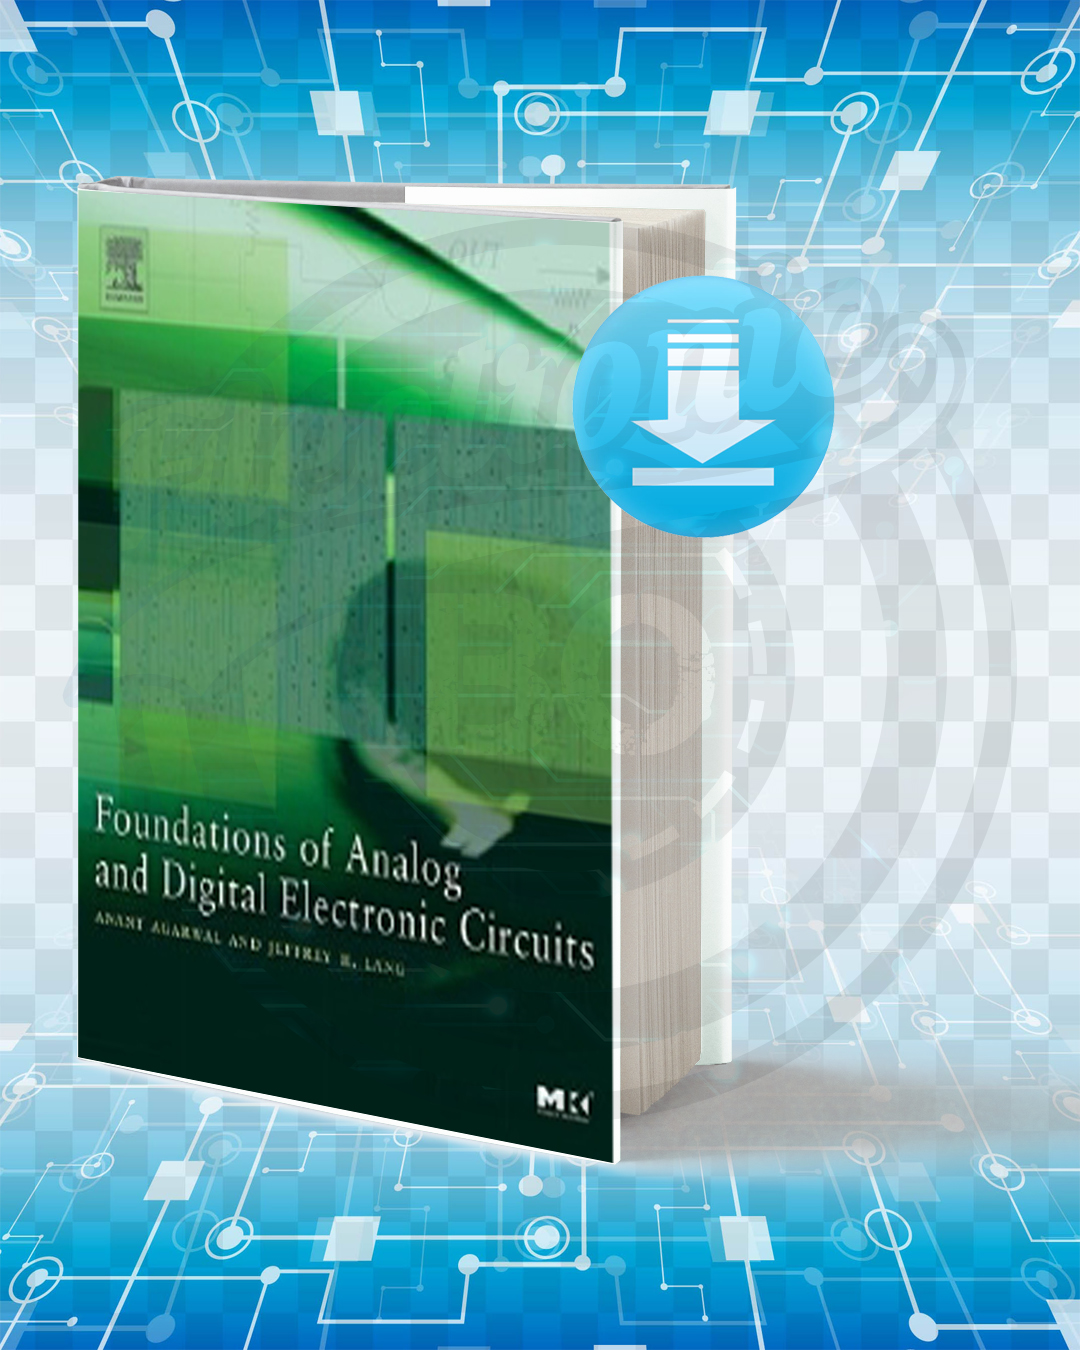 Download Foundations Of Analog And Digital Electronic Circuits pdf.